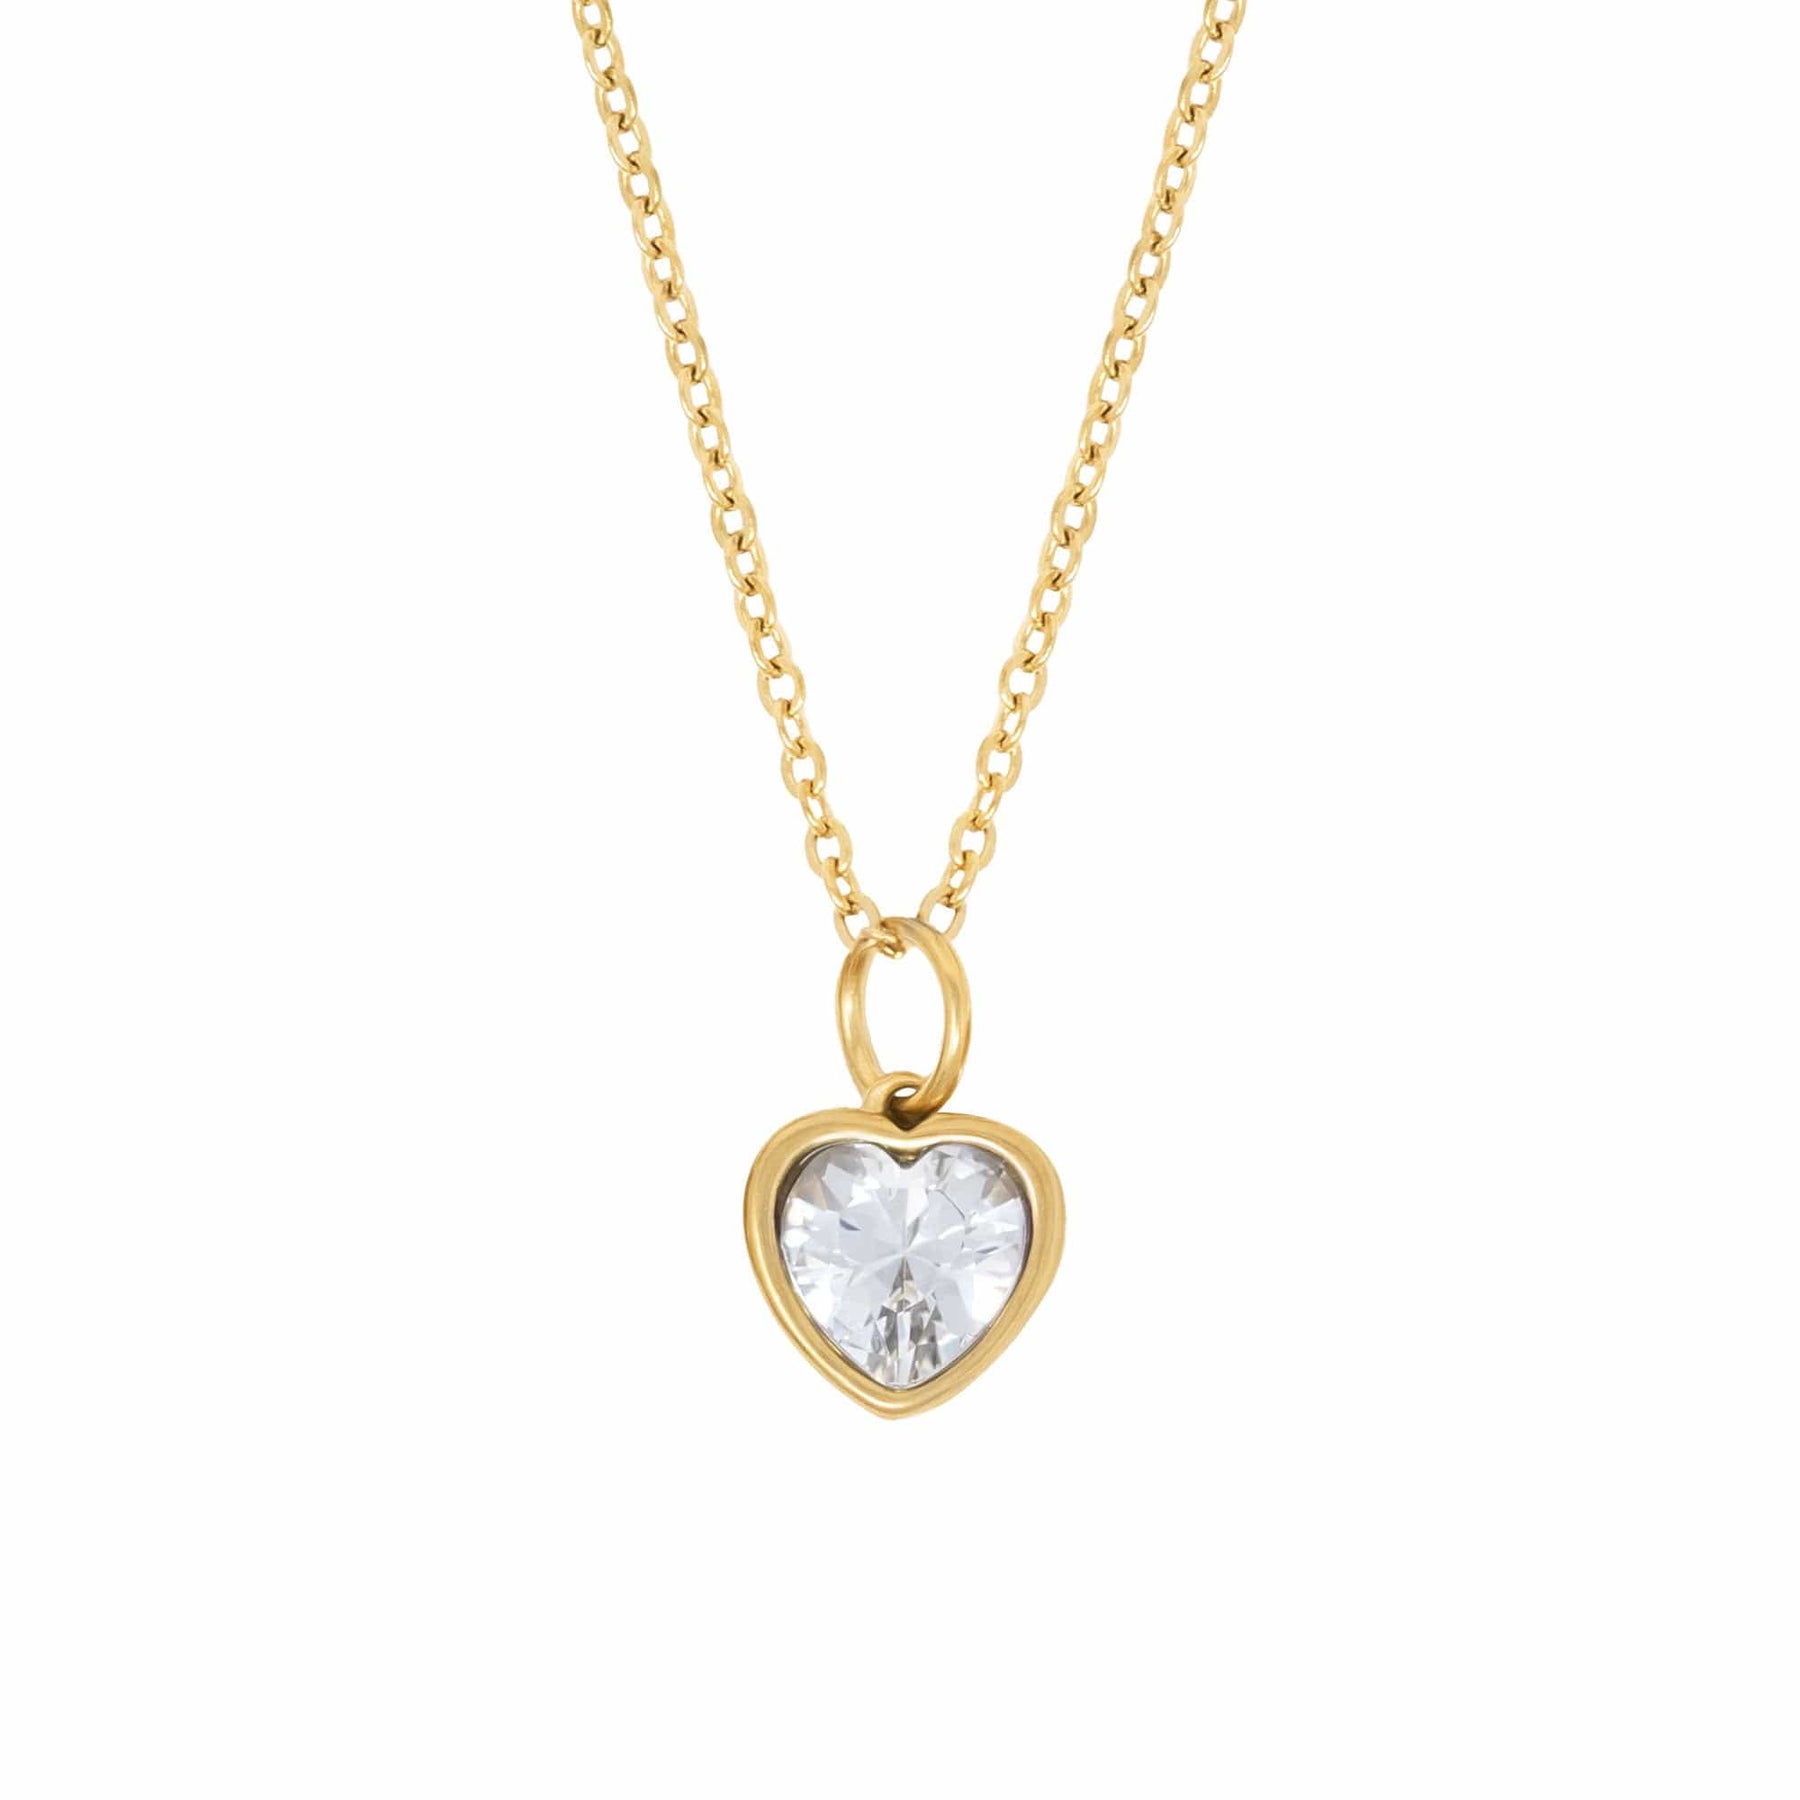 BohoMoon Stainless Steel Love Heart Birthstone Necklace Gold / April